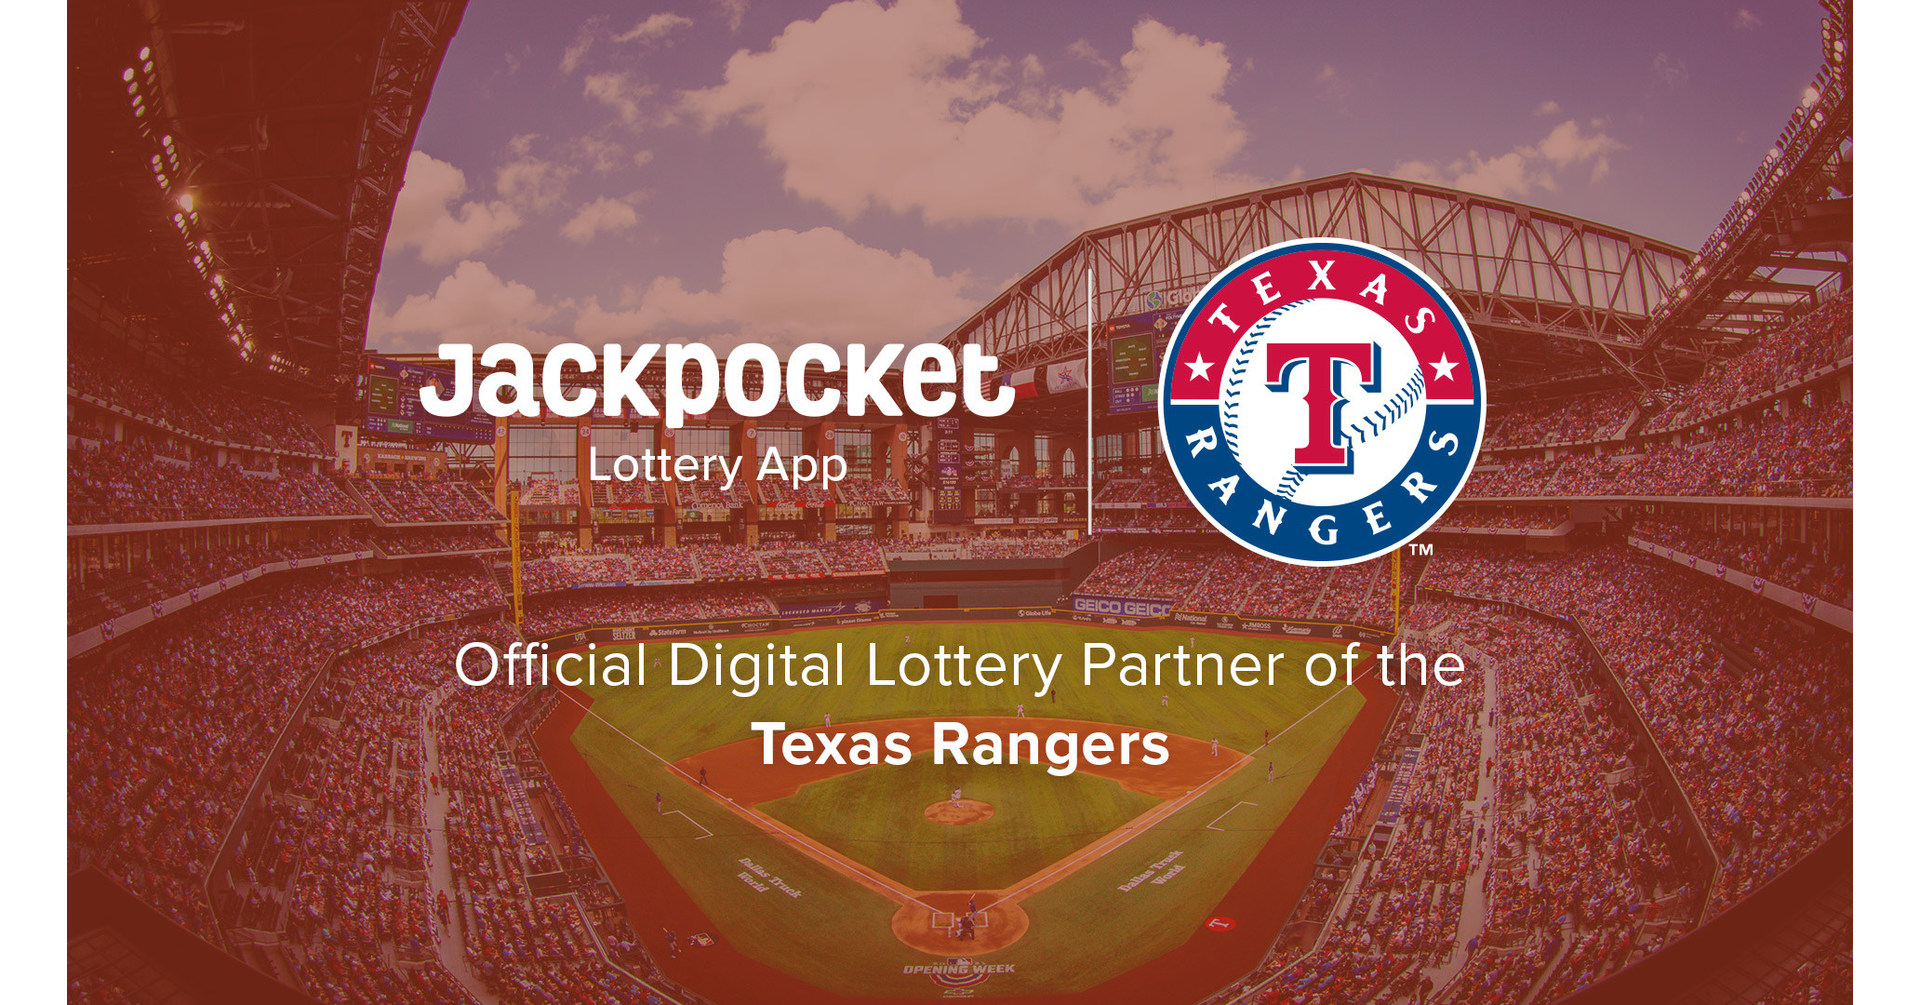 Jackpocket Named Official Digital Lottery Partner of the Texas Rangers